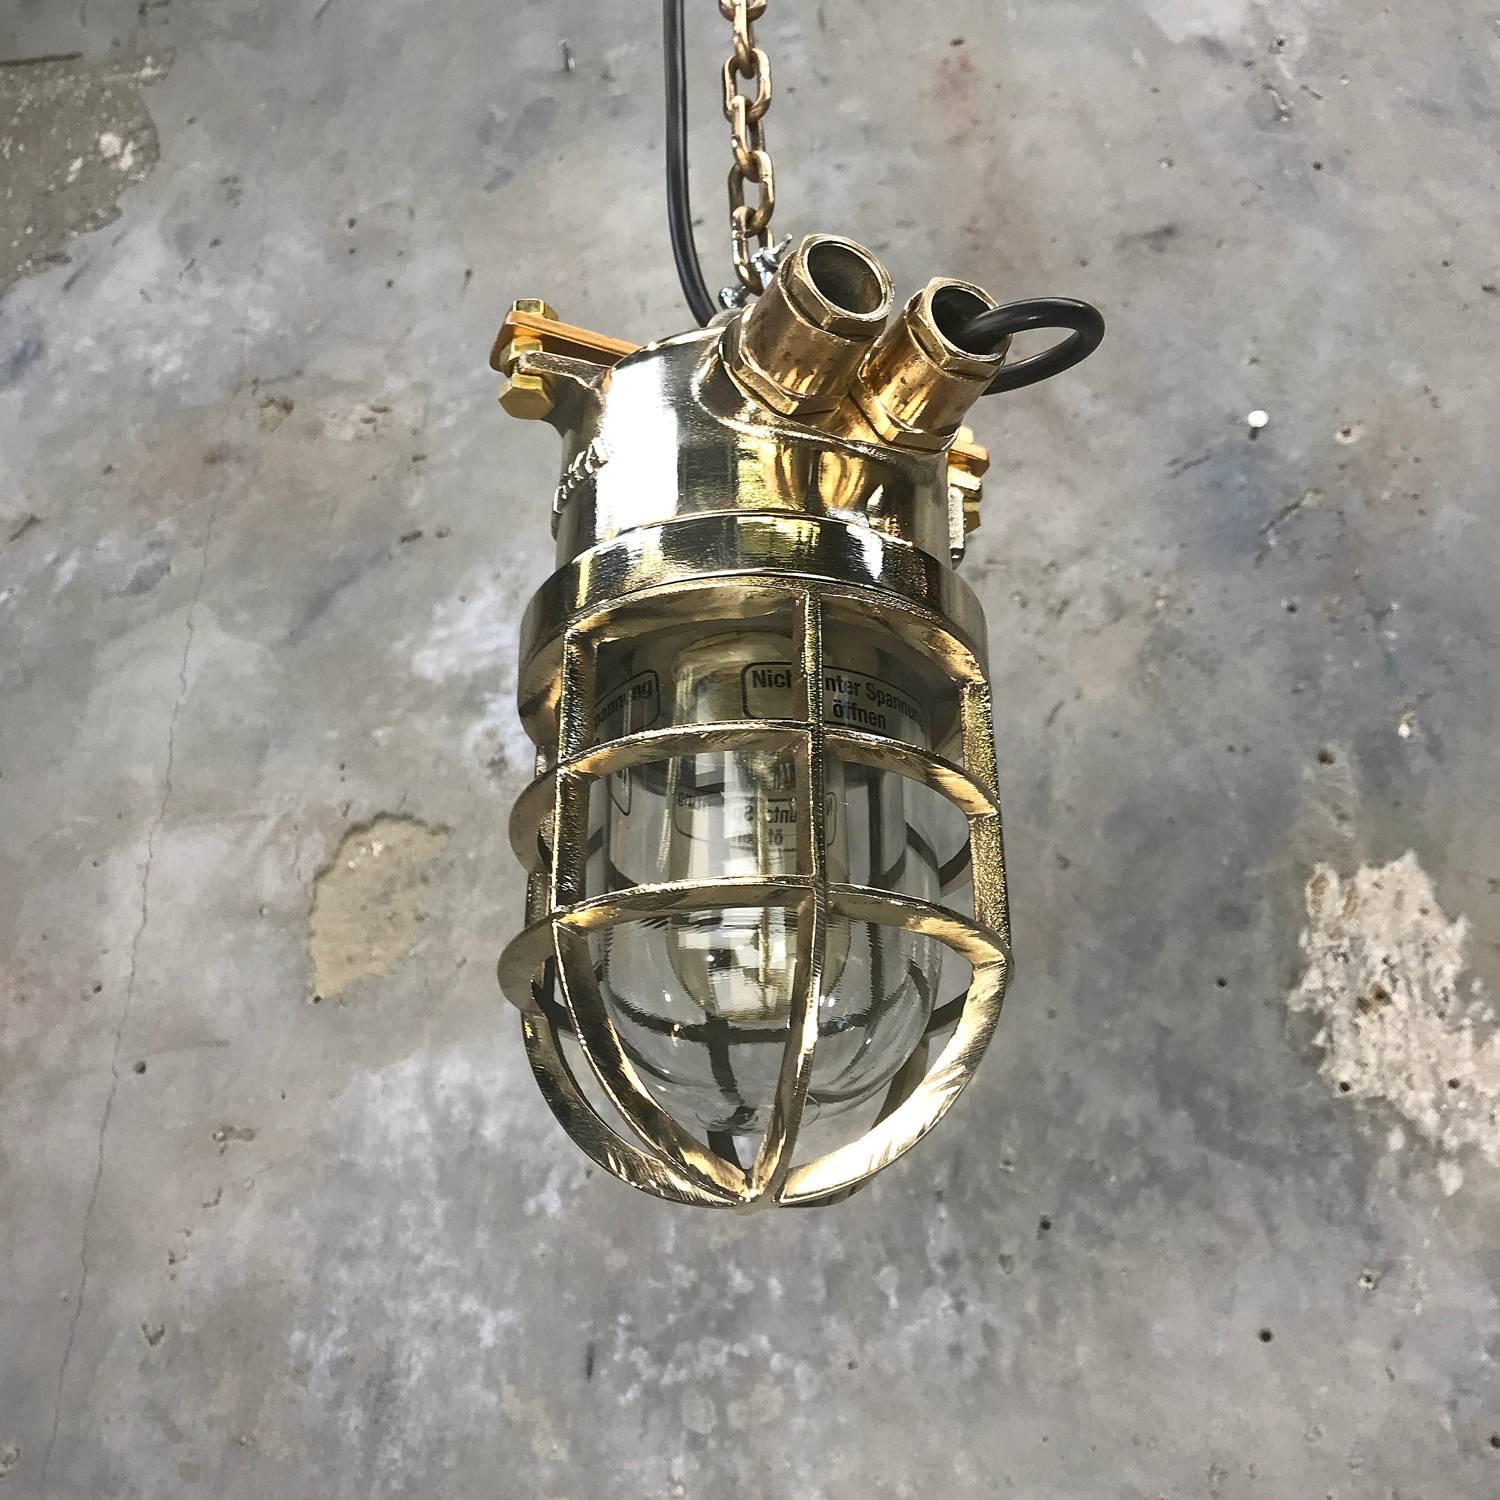 Late 20th Century Late Century German Cast Brass and Glass Shade Explosion Proof Pendant Light For Sale